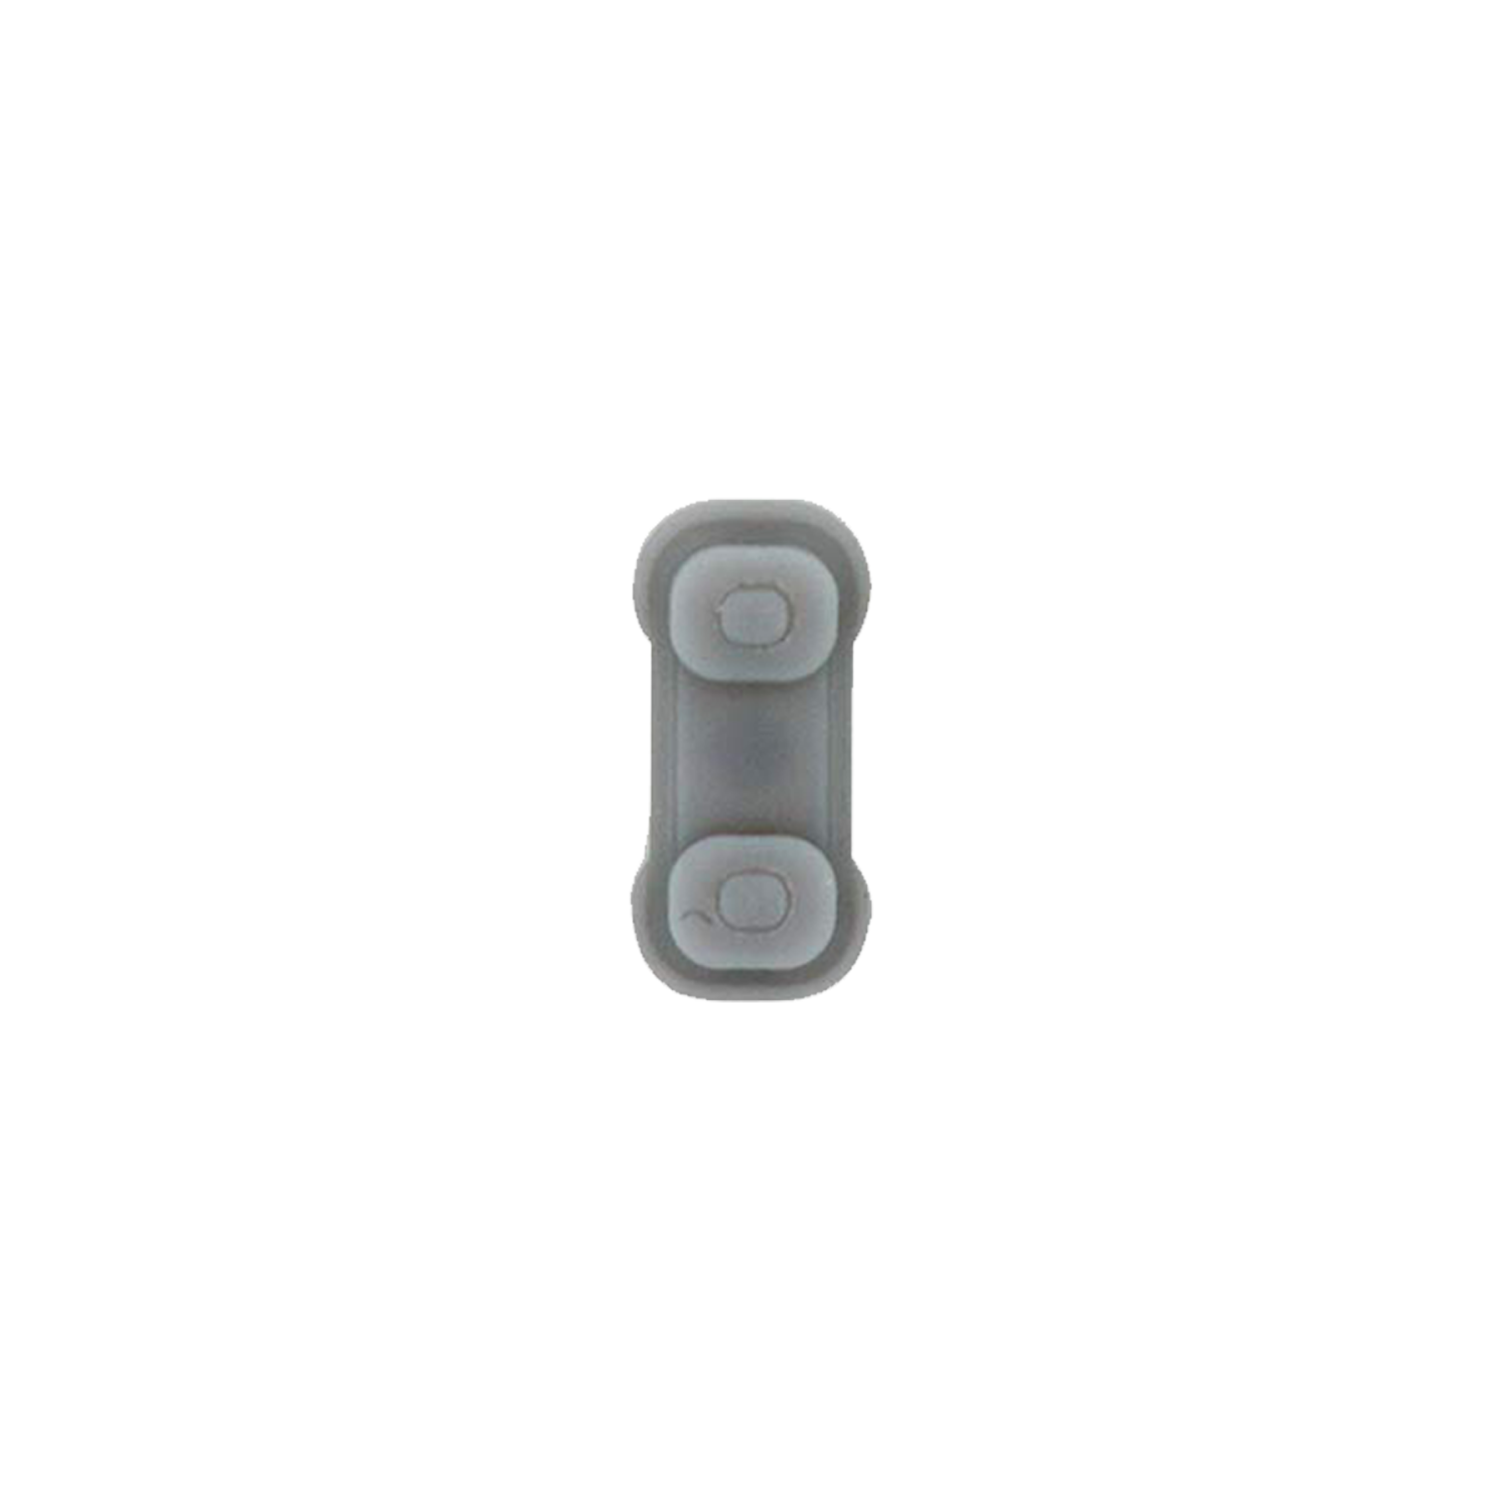 Replacement Rubber Conductive D-Pad Buttons (Right) Set Compatible With Nintendo Switch Joy Con Controller (6 Piece Set)